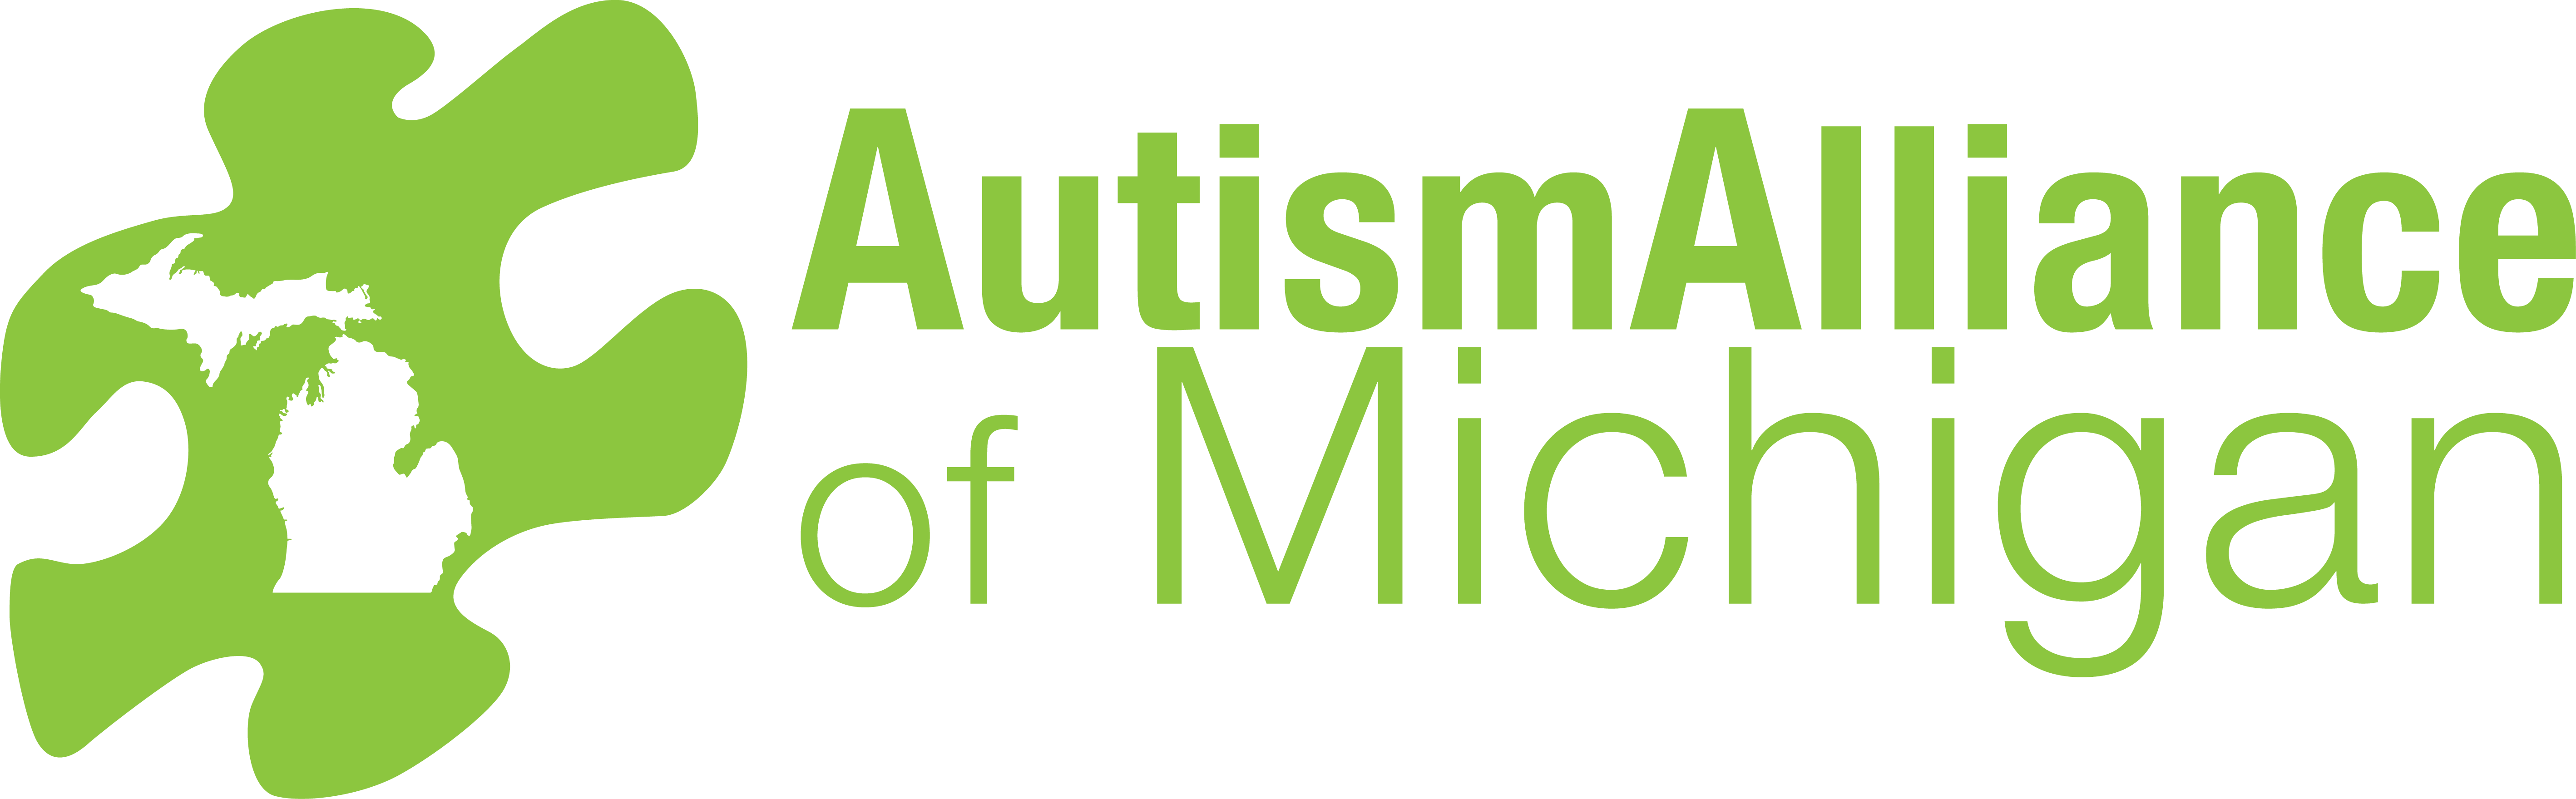 Green text reads, Autism Alliance of Michigan. This text is next to an image of a puzzle piece with the image of the state of Michigan inside of it.